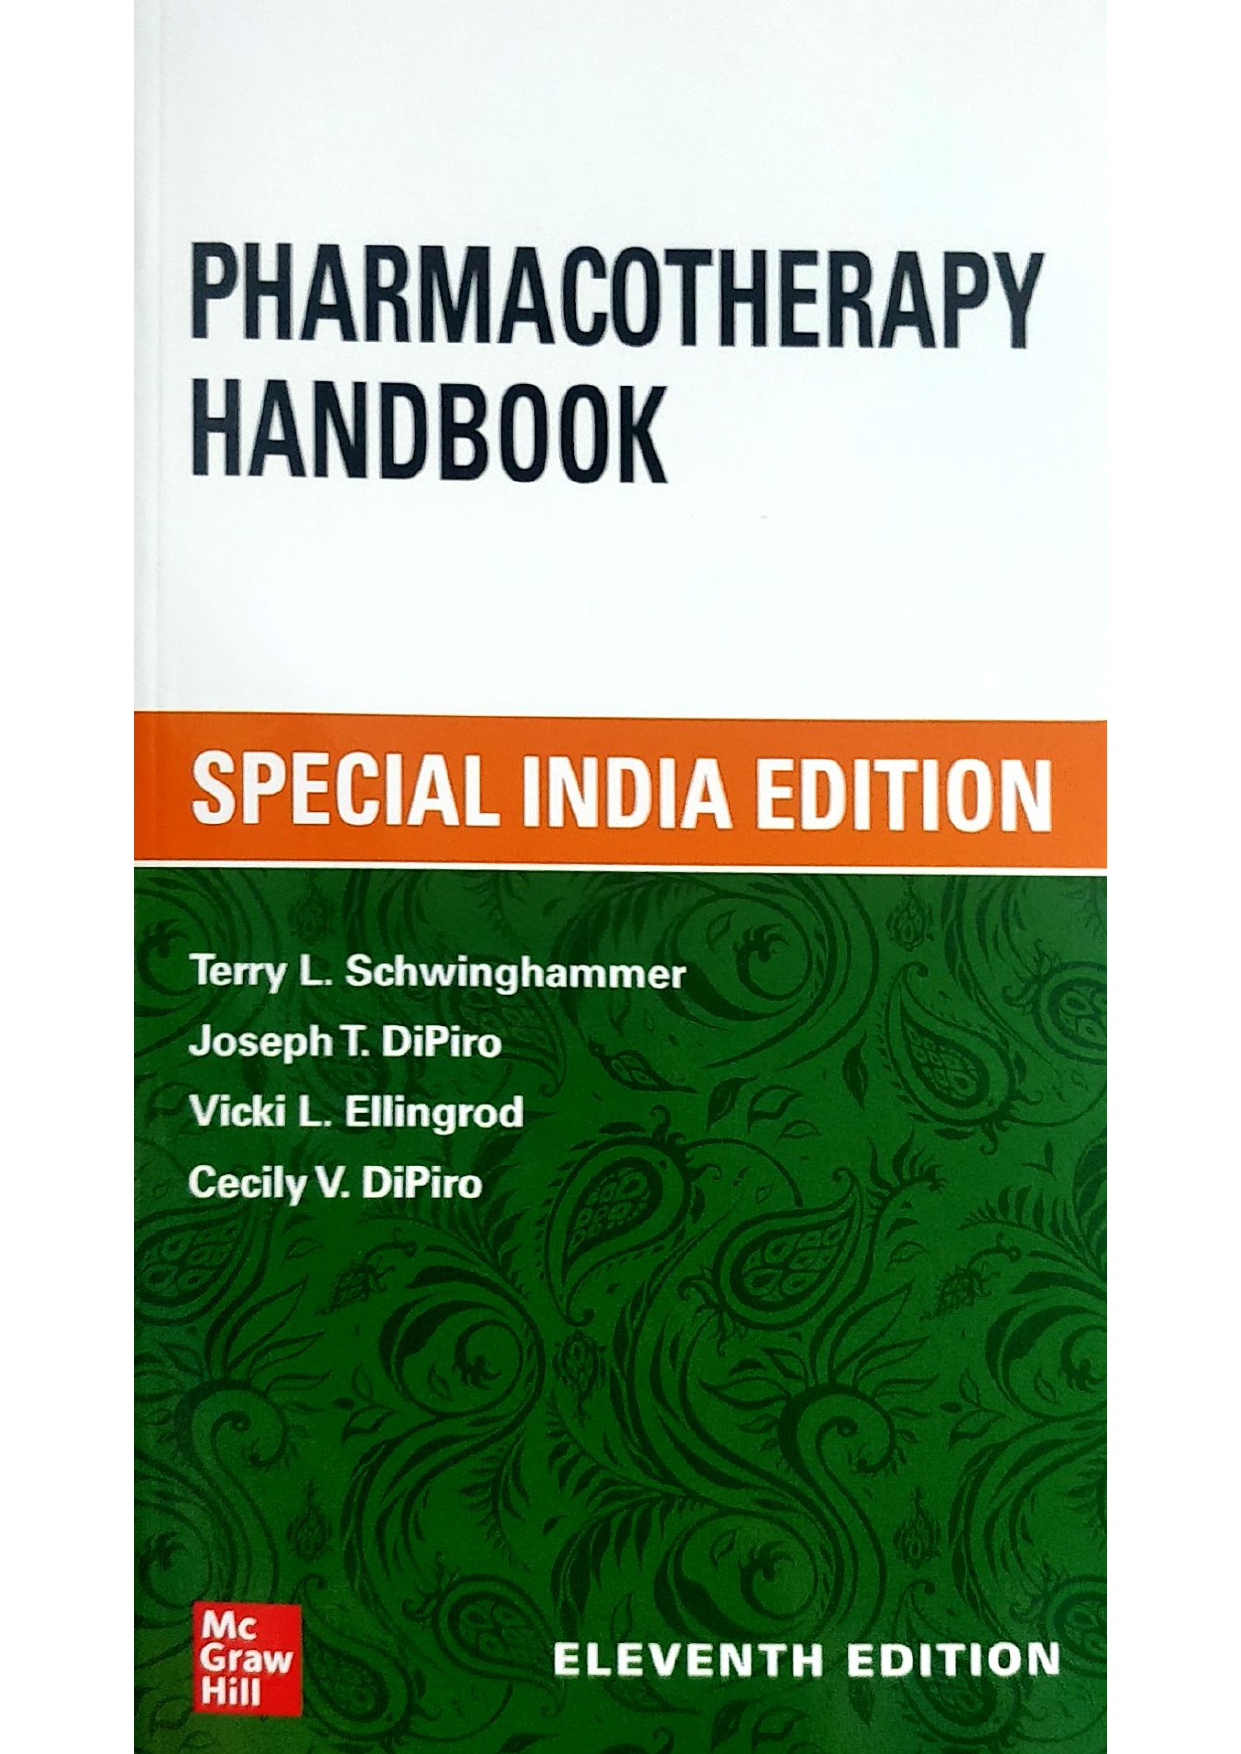 Pharmacotherapy Handbook, Eleventh Edition  ( special india edition )